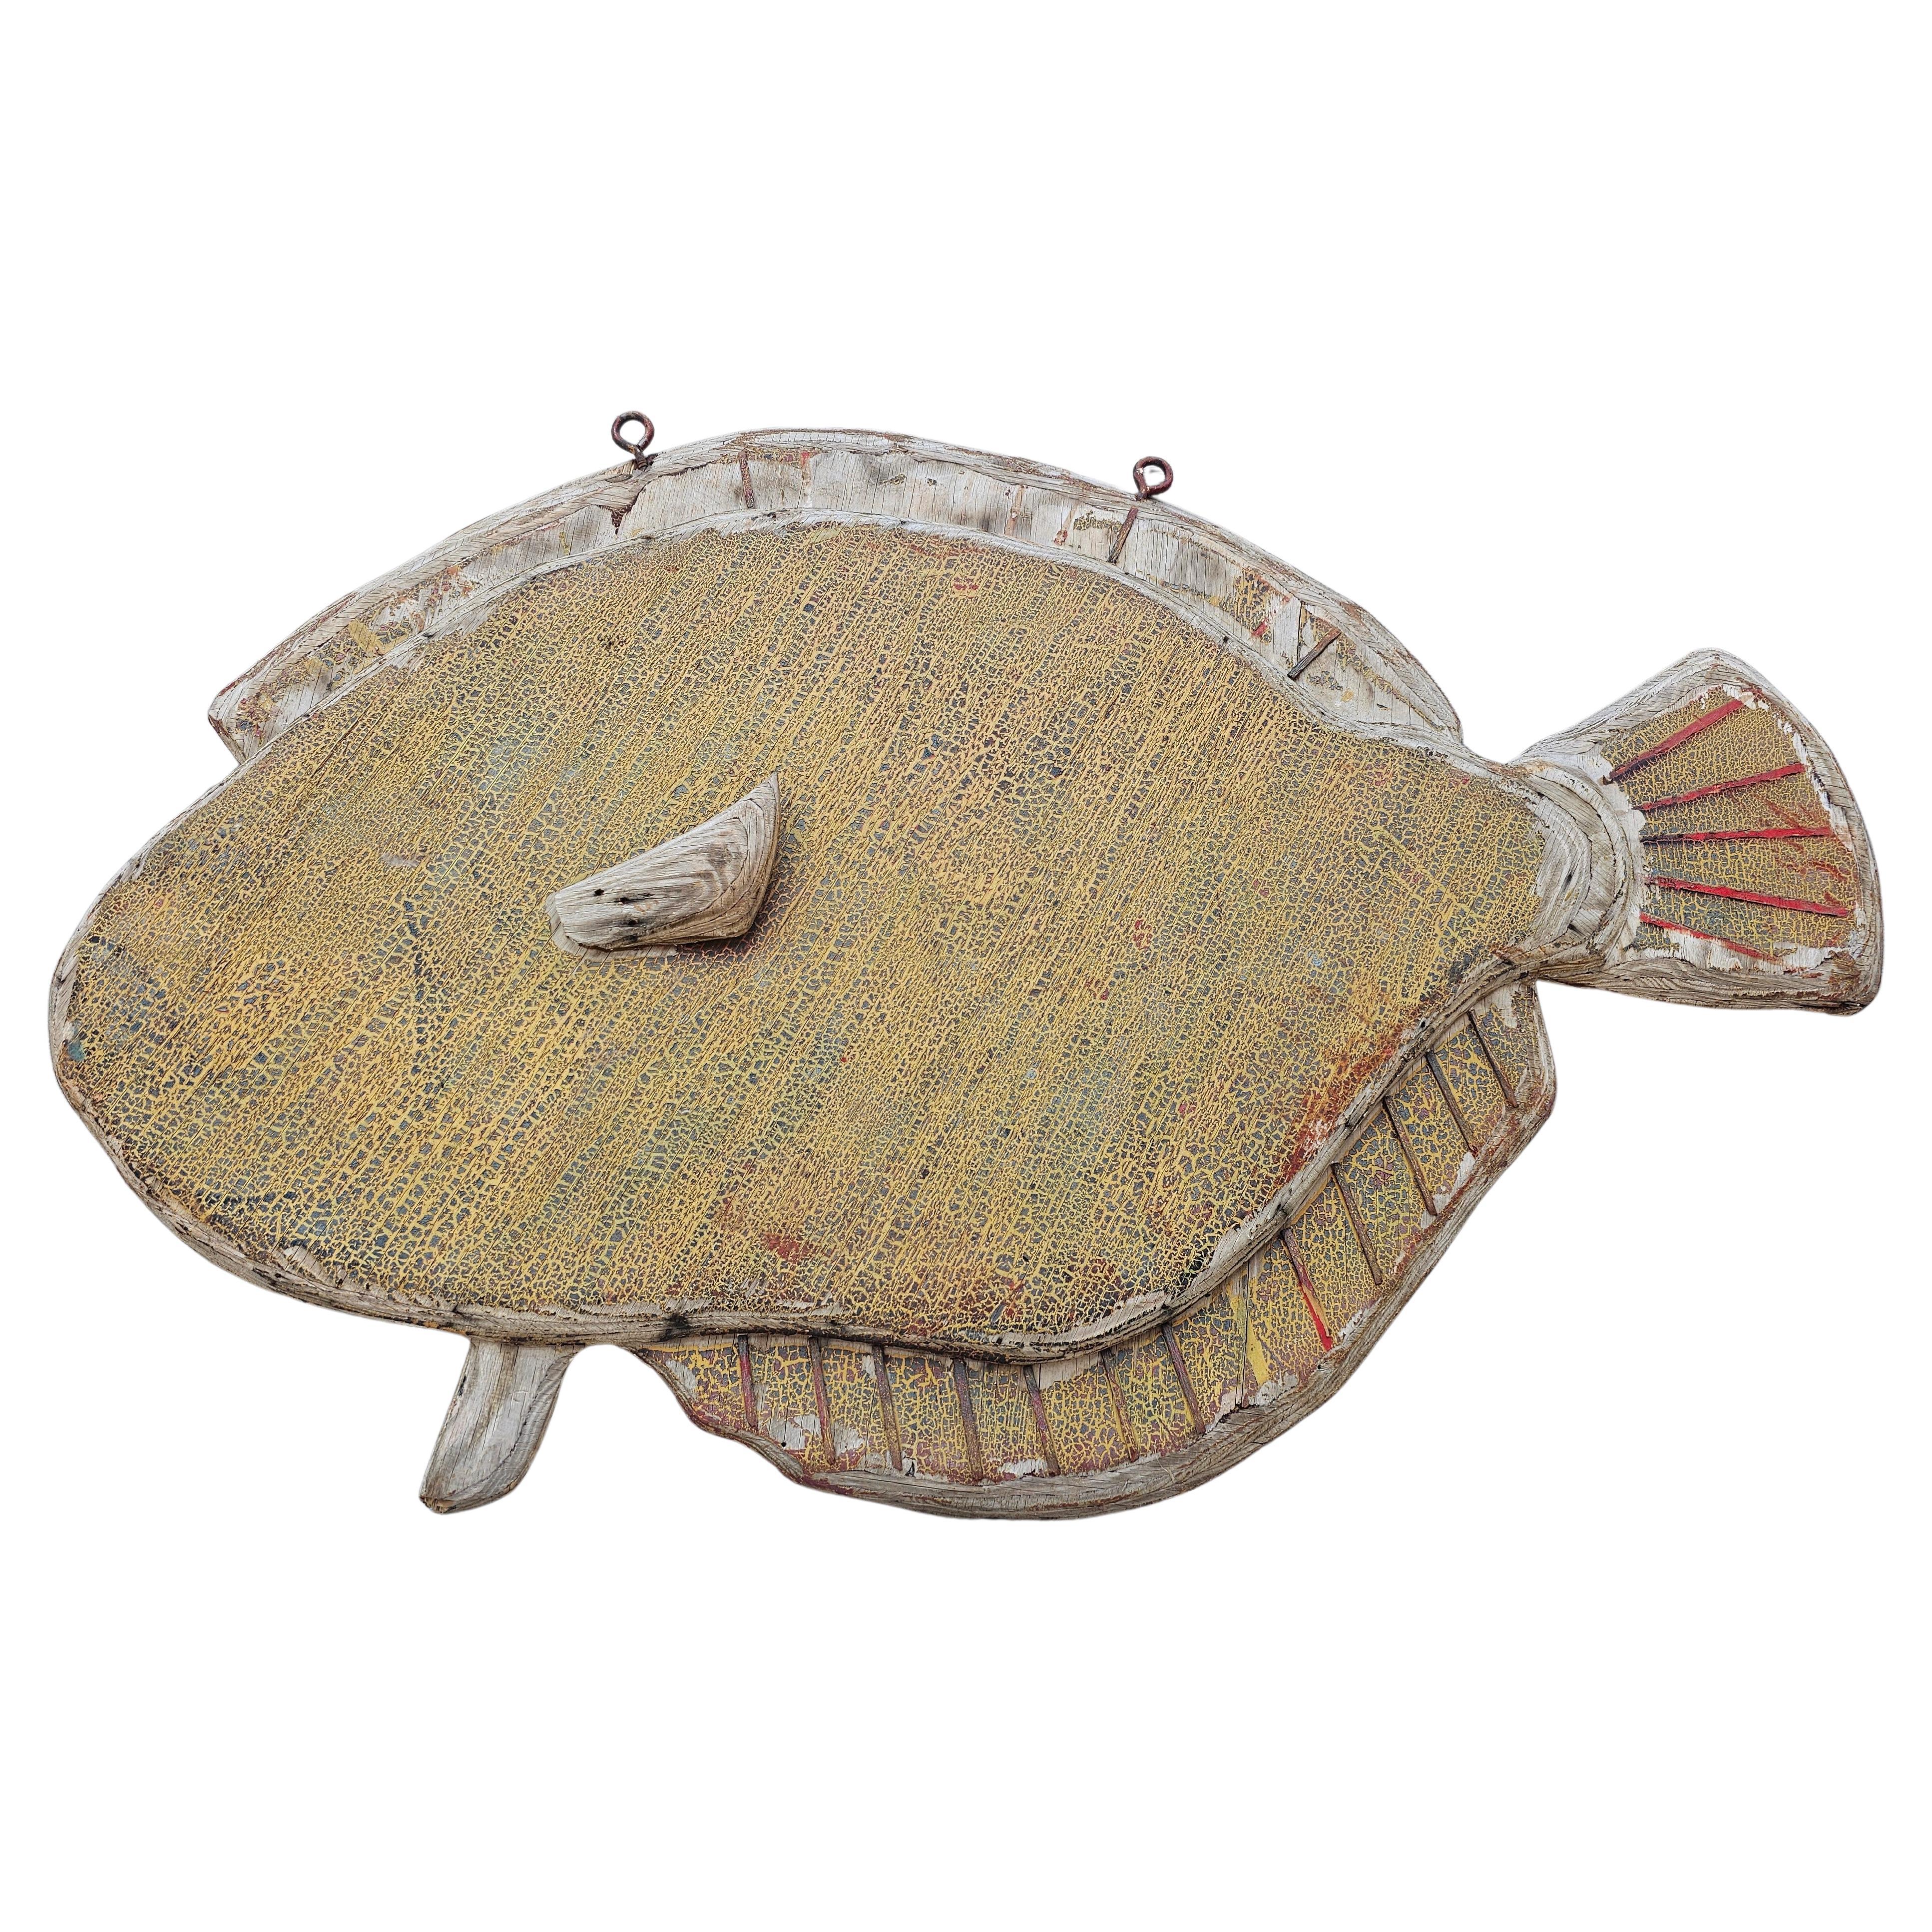 Antique North Carolina Bait Shop Retail Flounder Fish Painted Wood Trade Sign For Sale